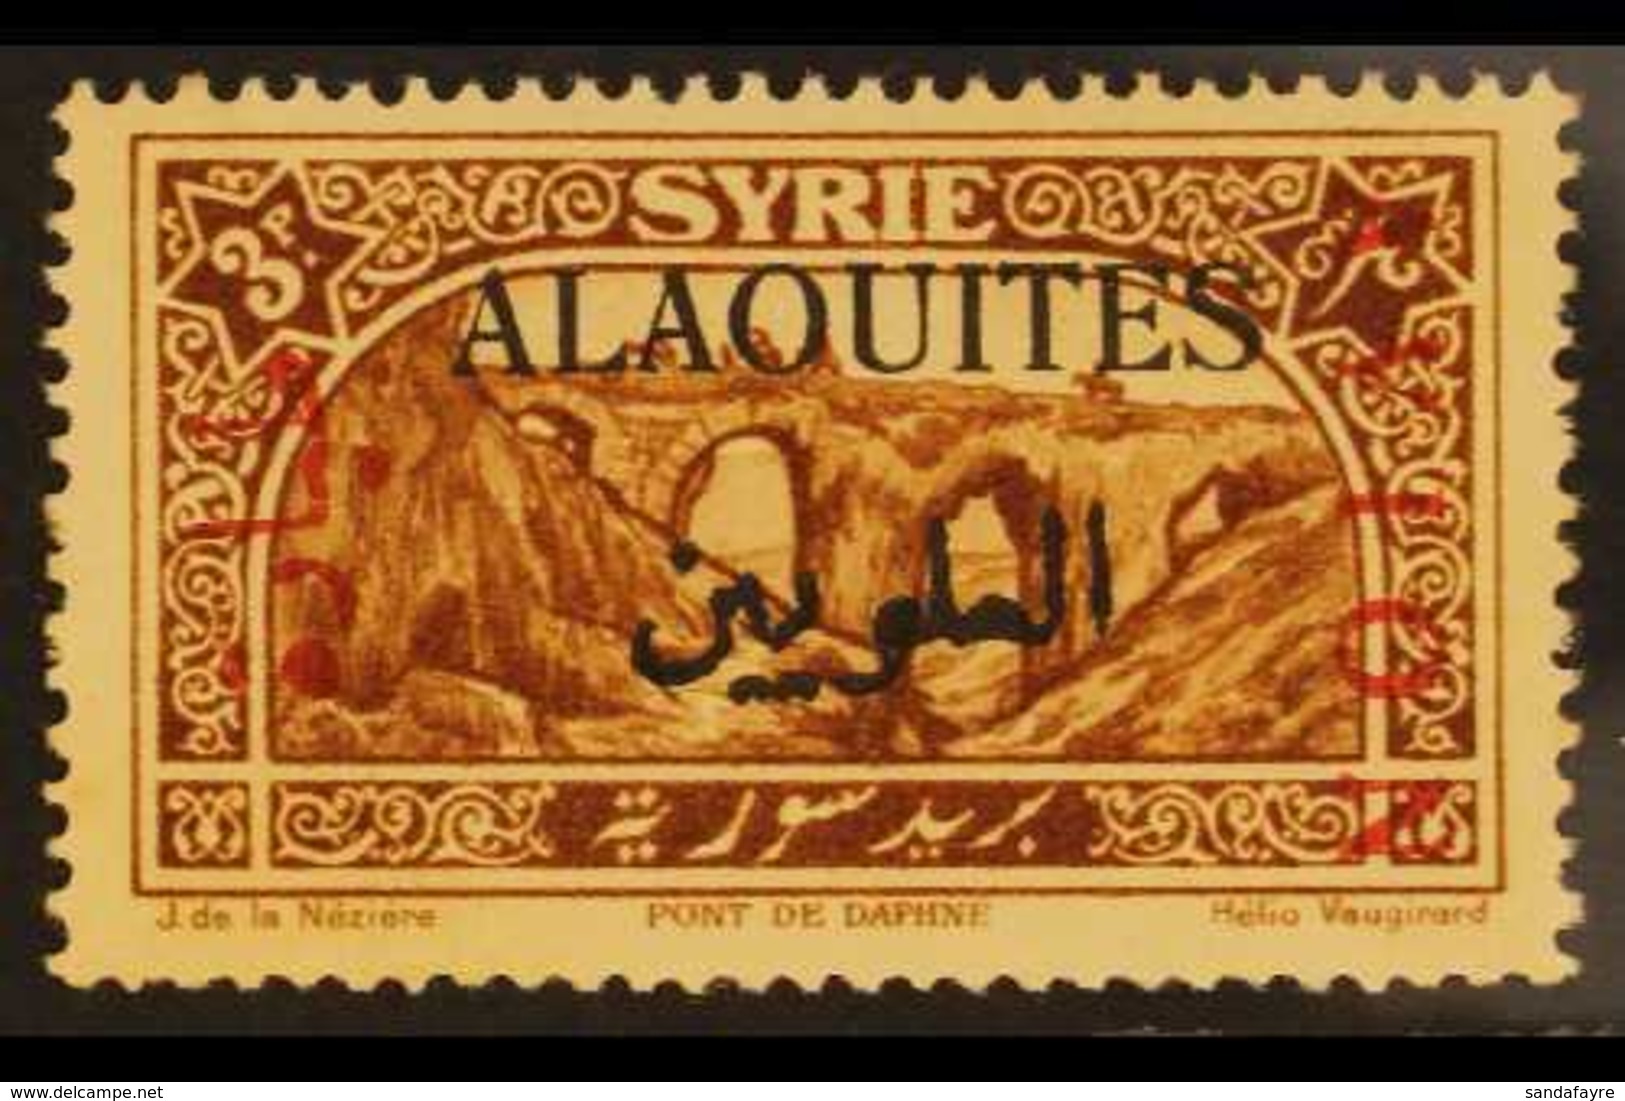 ALAOUITES 1925 3p Brown Airmail Ovptd In RED, Variety "surcharge Reversed" (Avion At Right), Yv PA6 Var, Vf Never Hinged - Syria